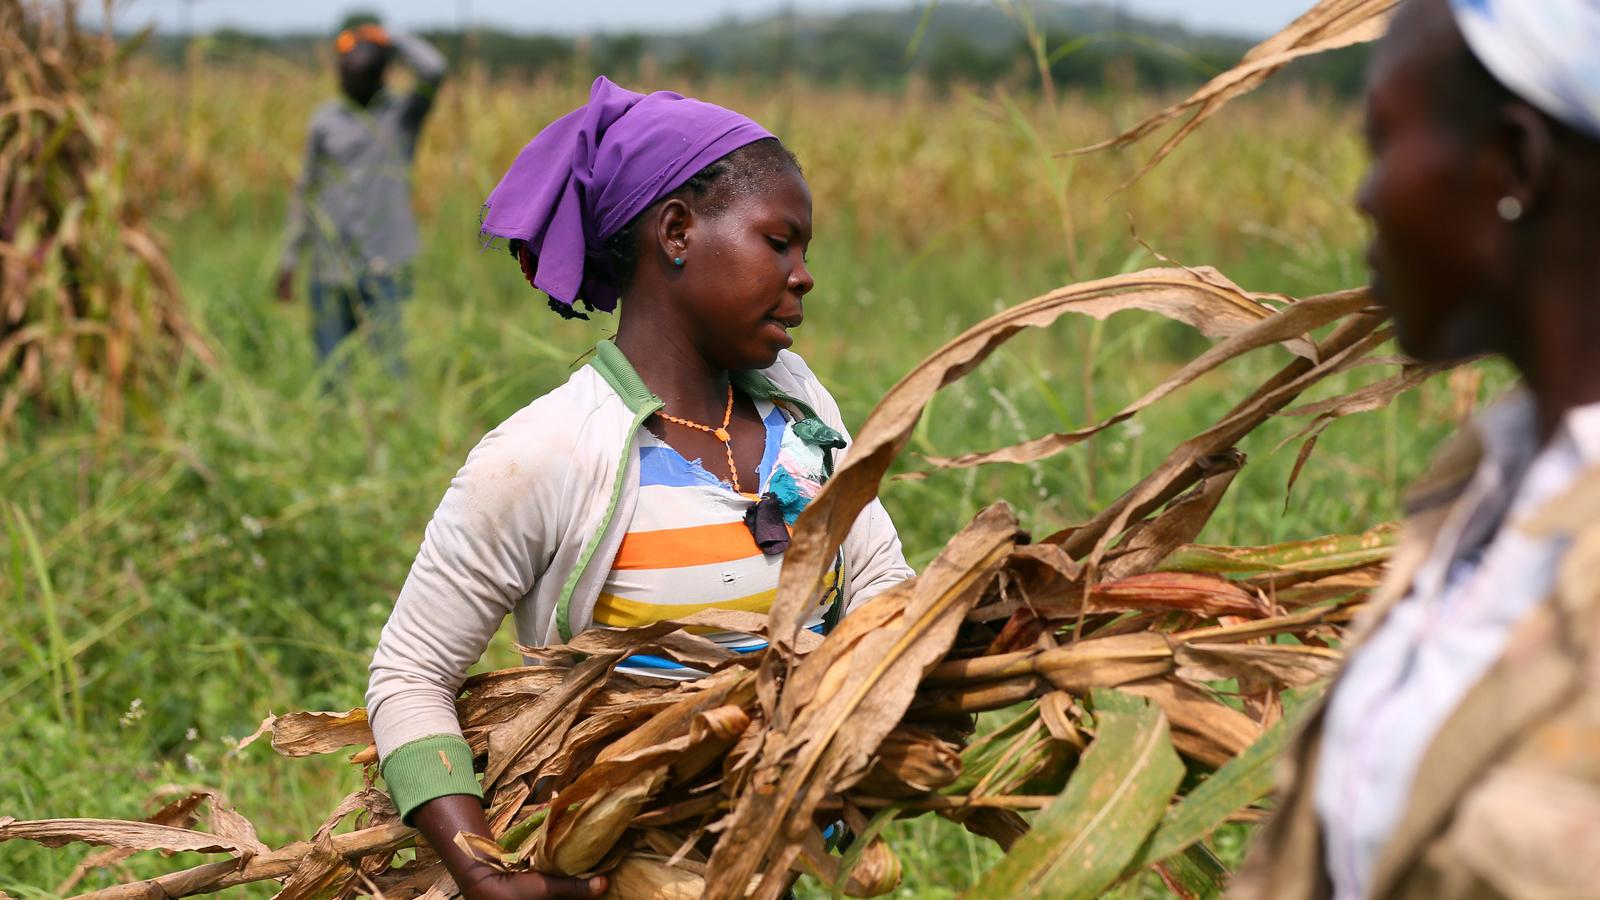 A woman wearing a purple scarf stands in a field holding maize stems